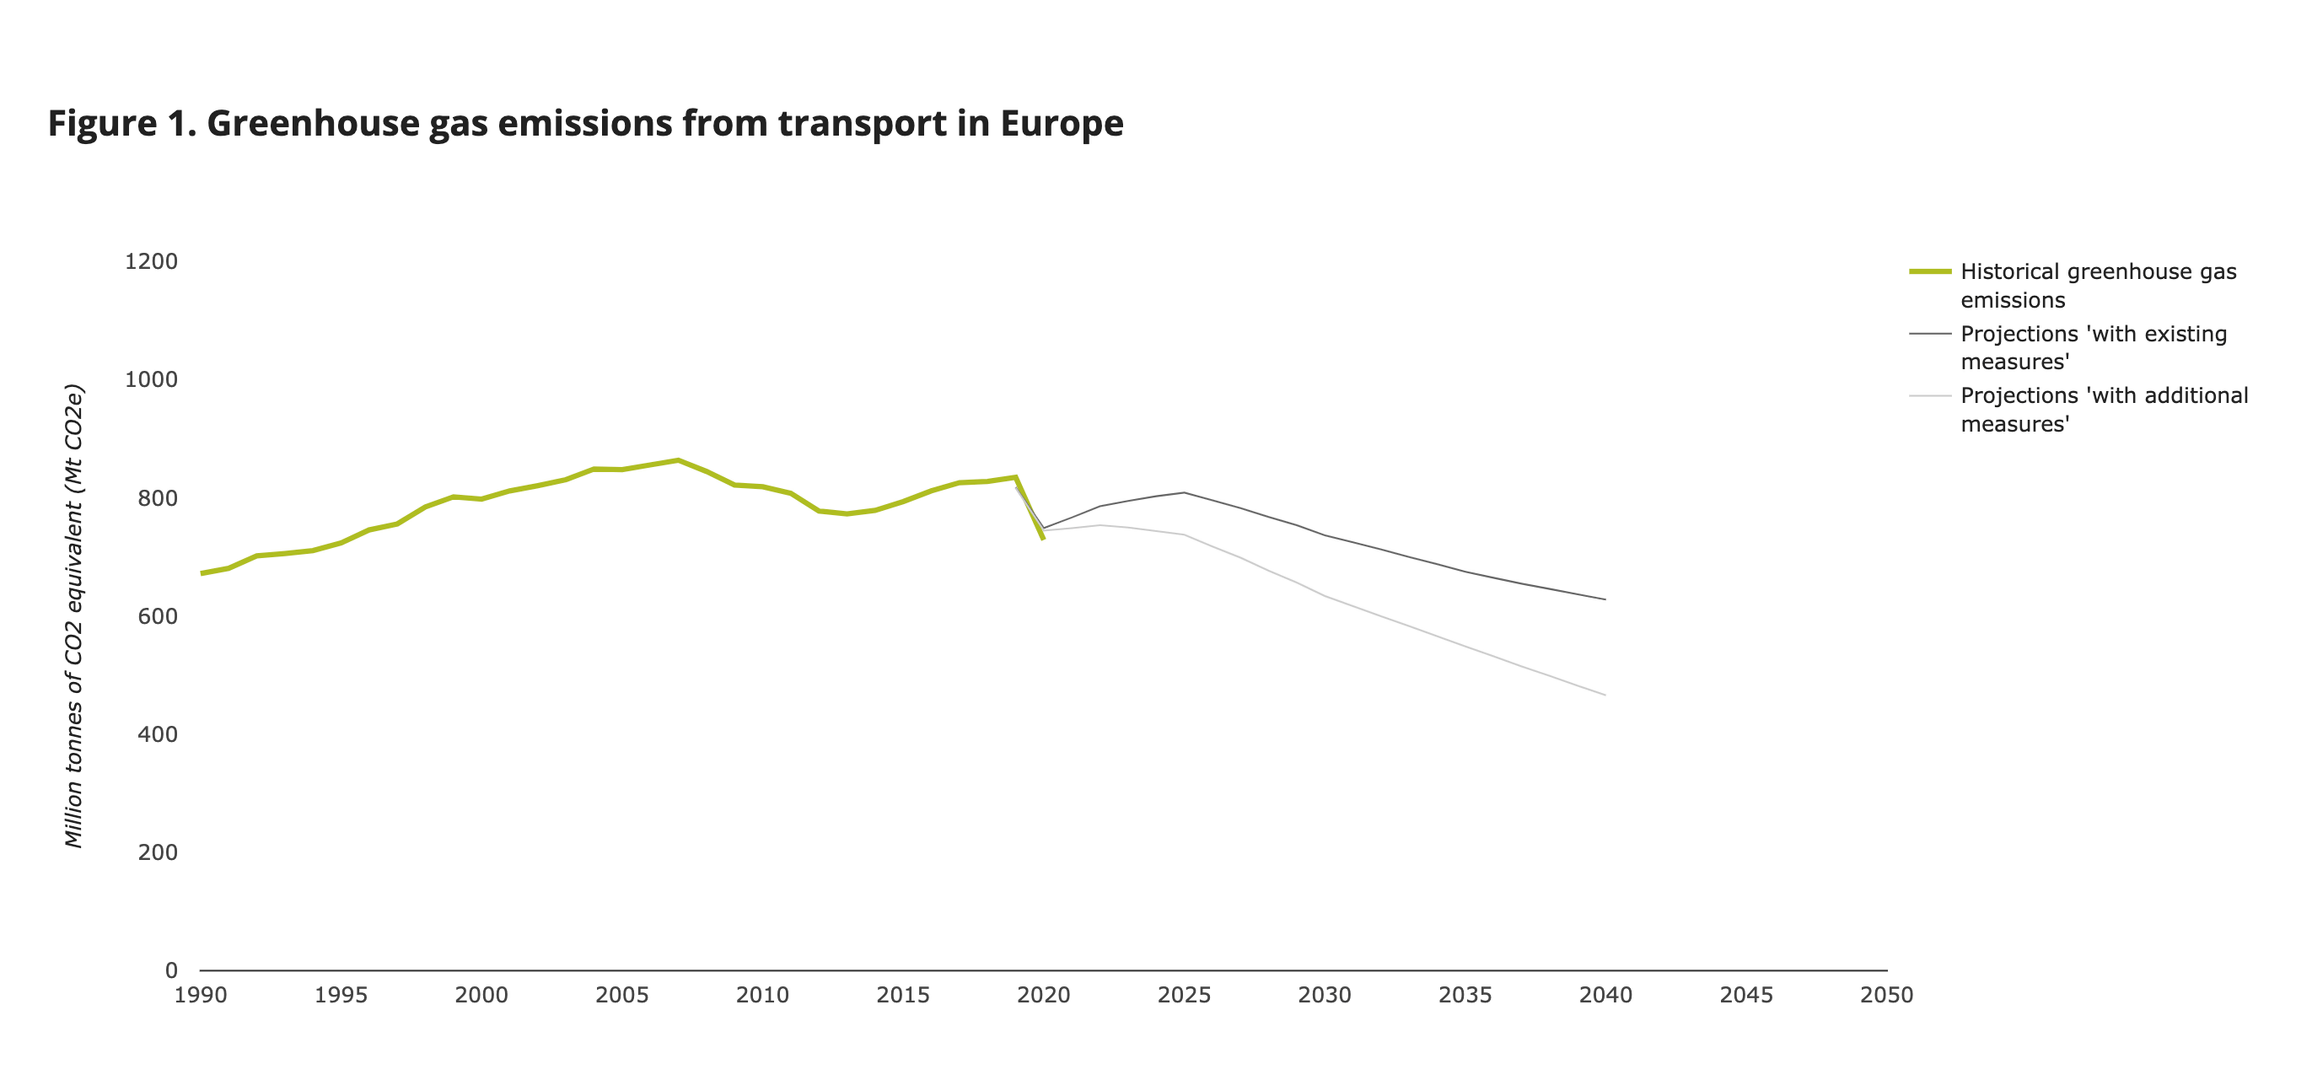 Greenhouse gas emissions from transport in Europe